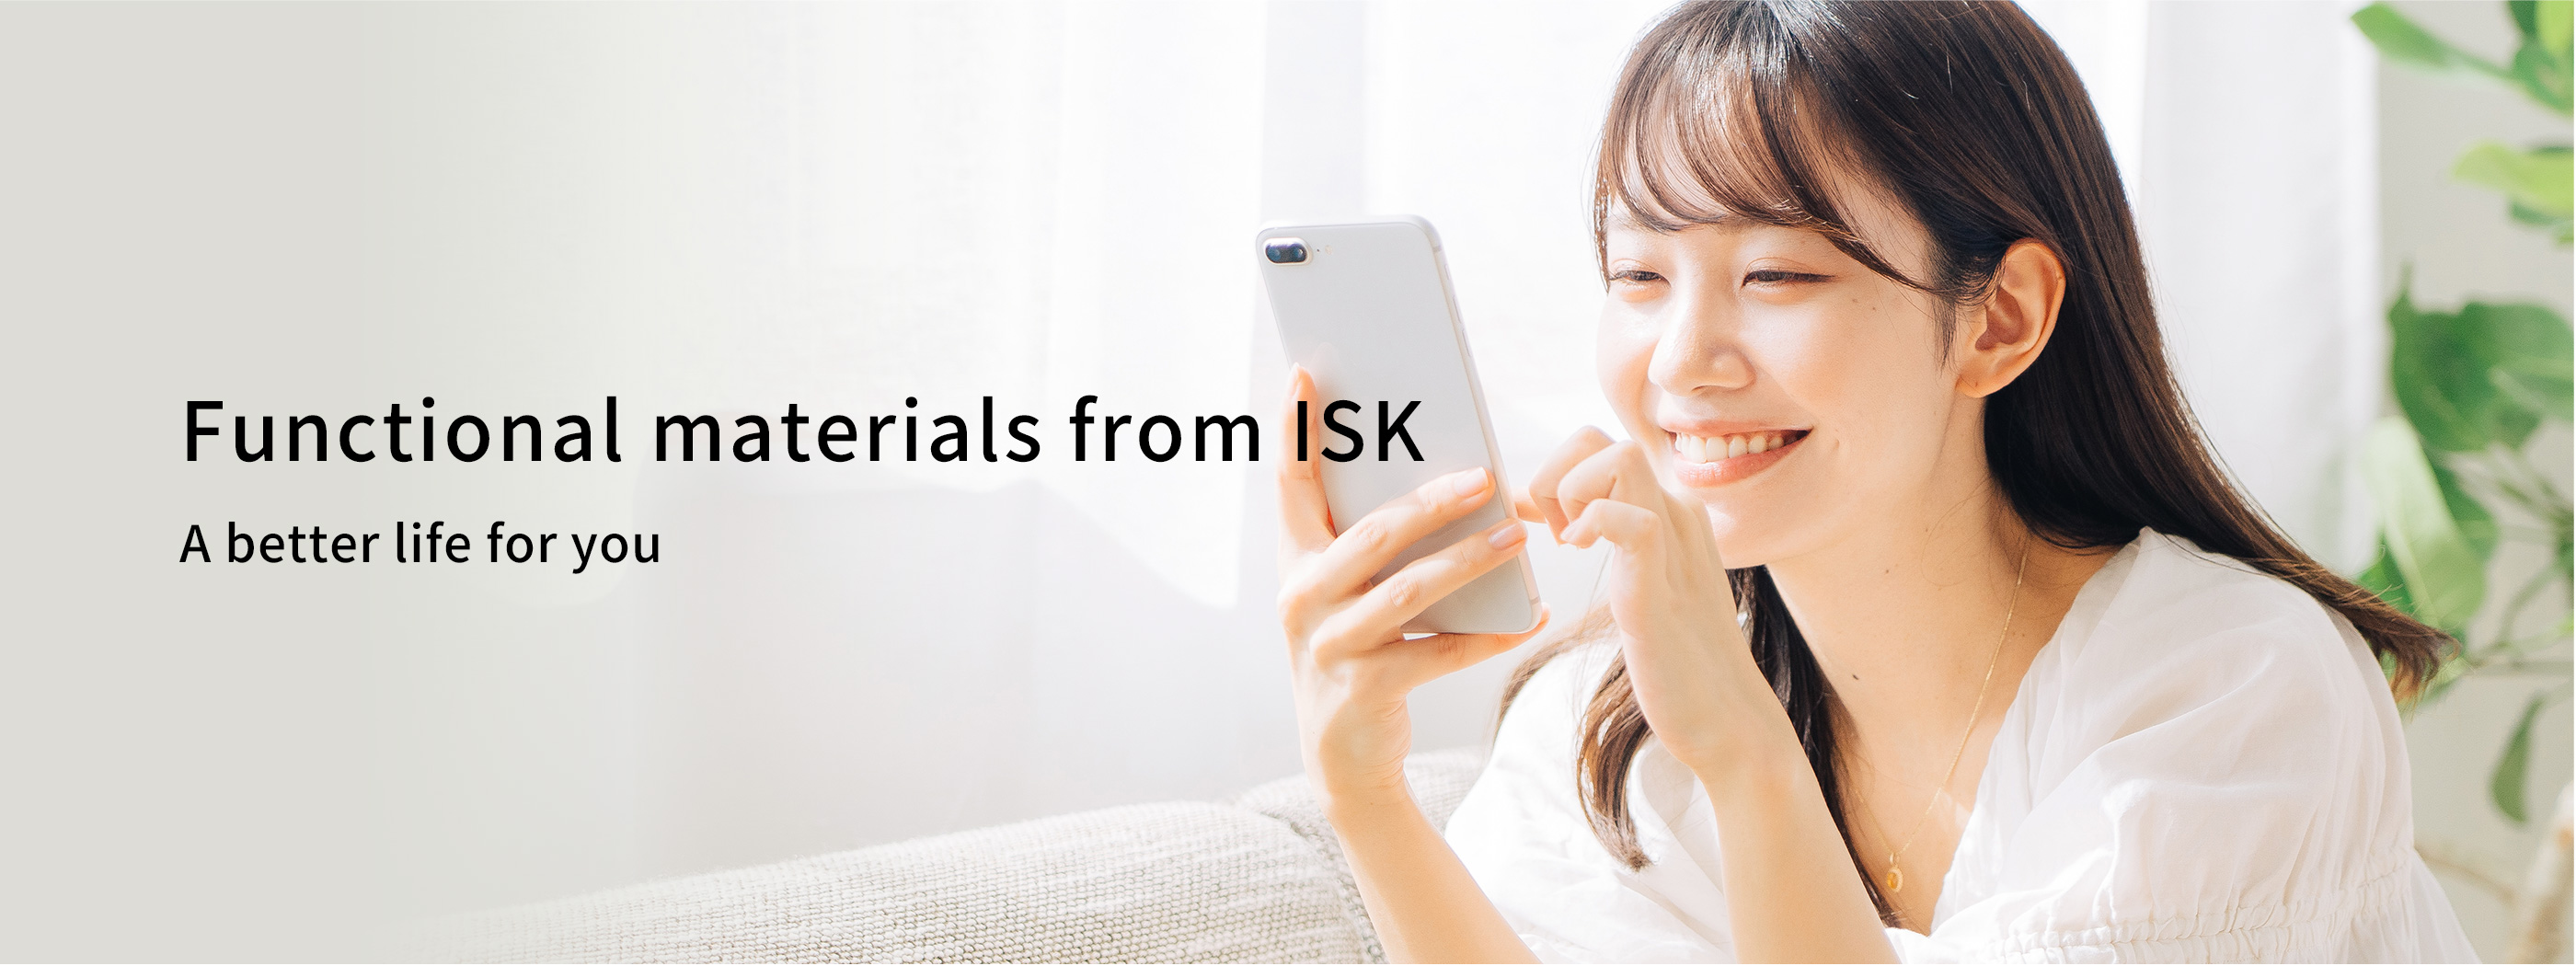 Functional materials from ISK A better life for you